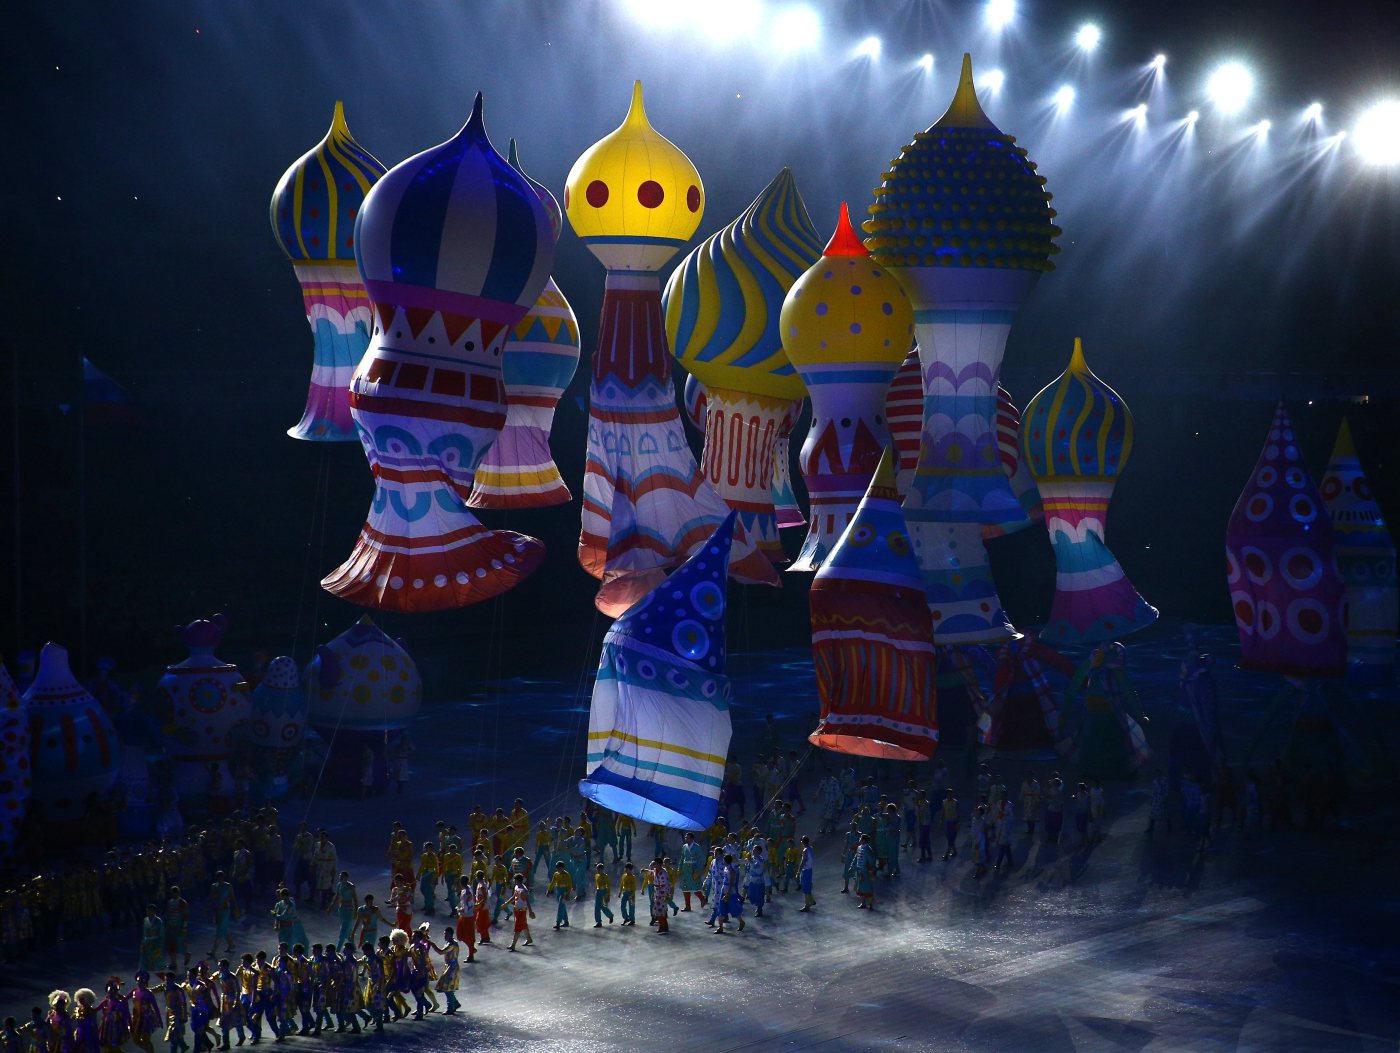 Performers with balloons representing St. Basil's cathedral.